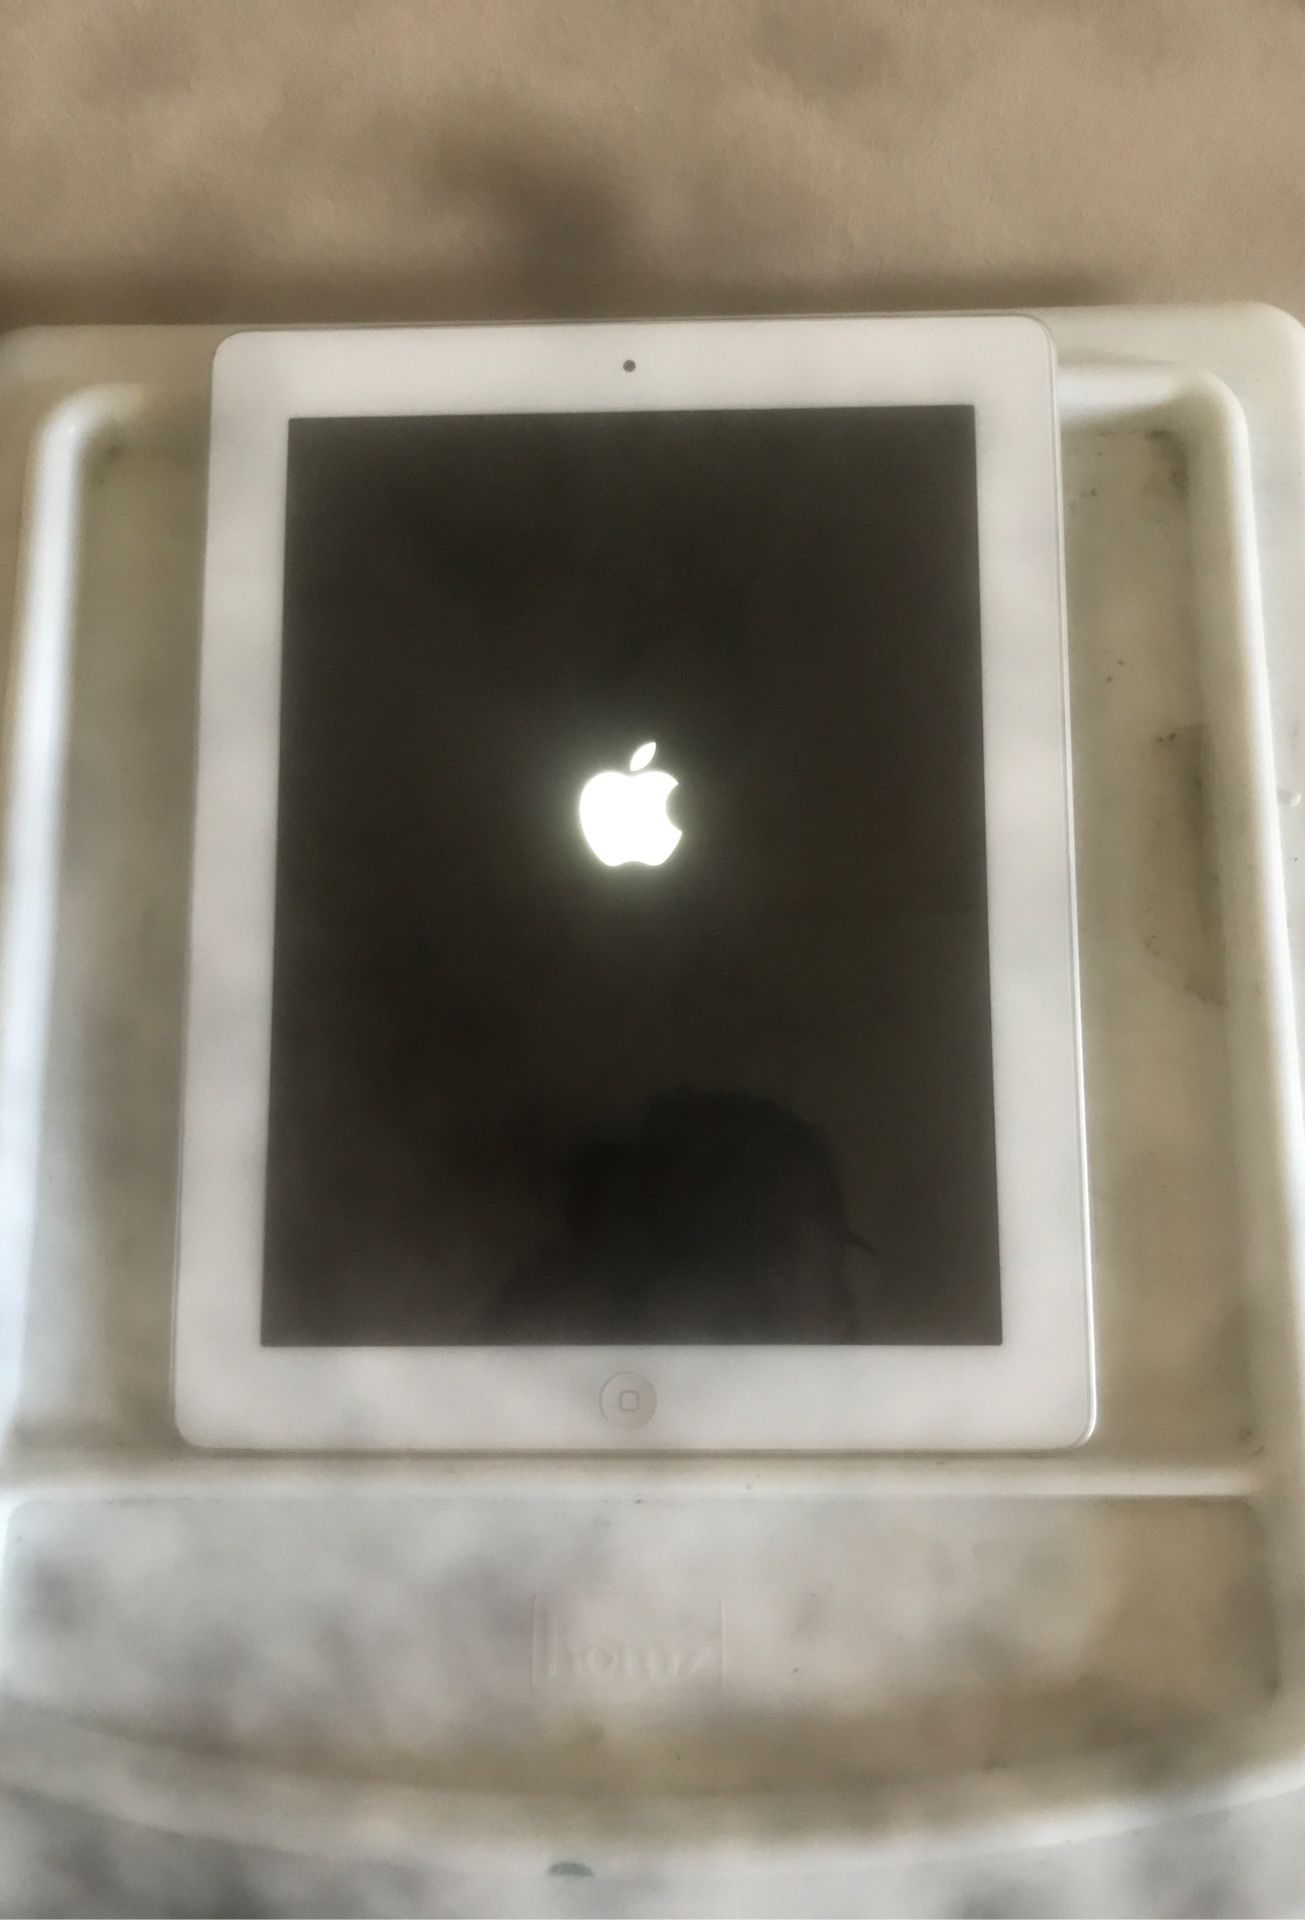 IPad 2 for sale no charger.